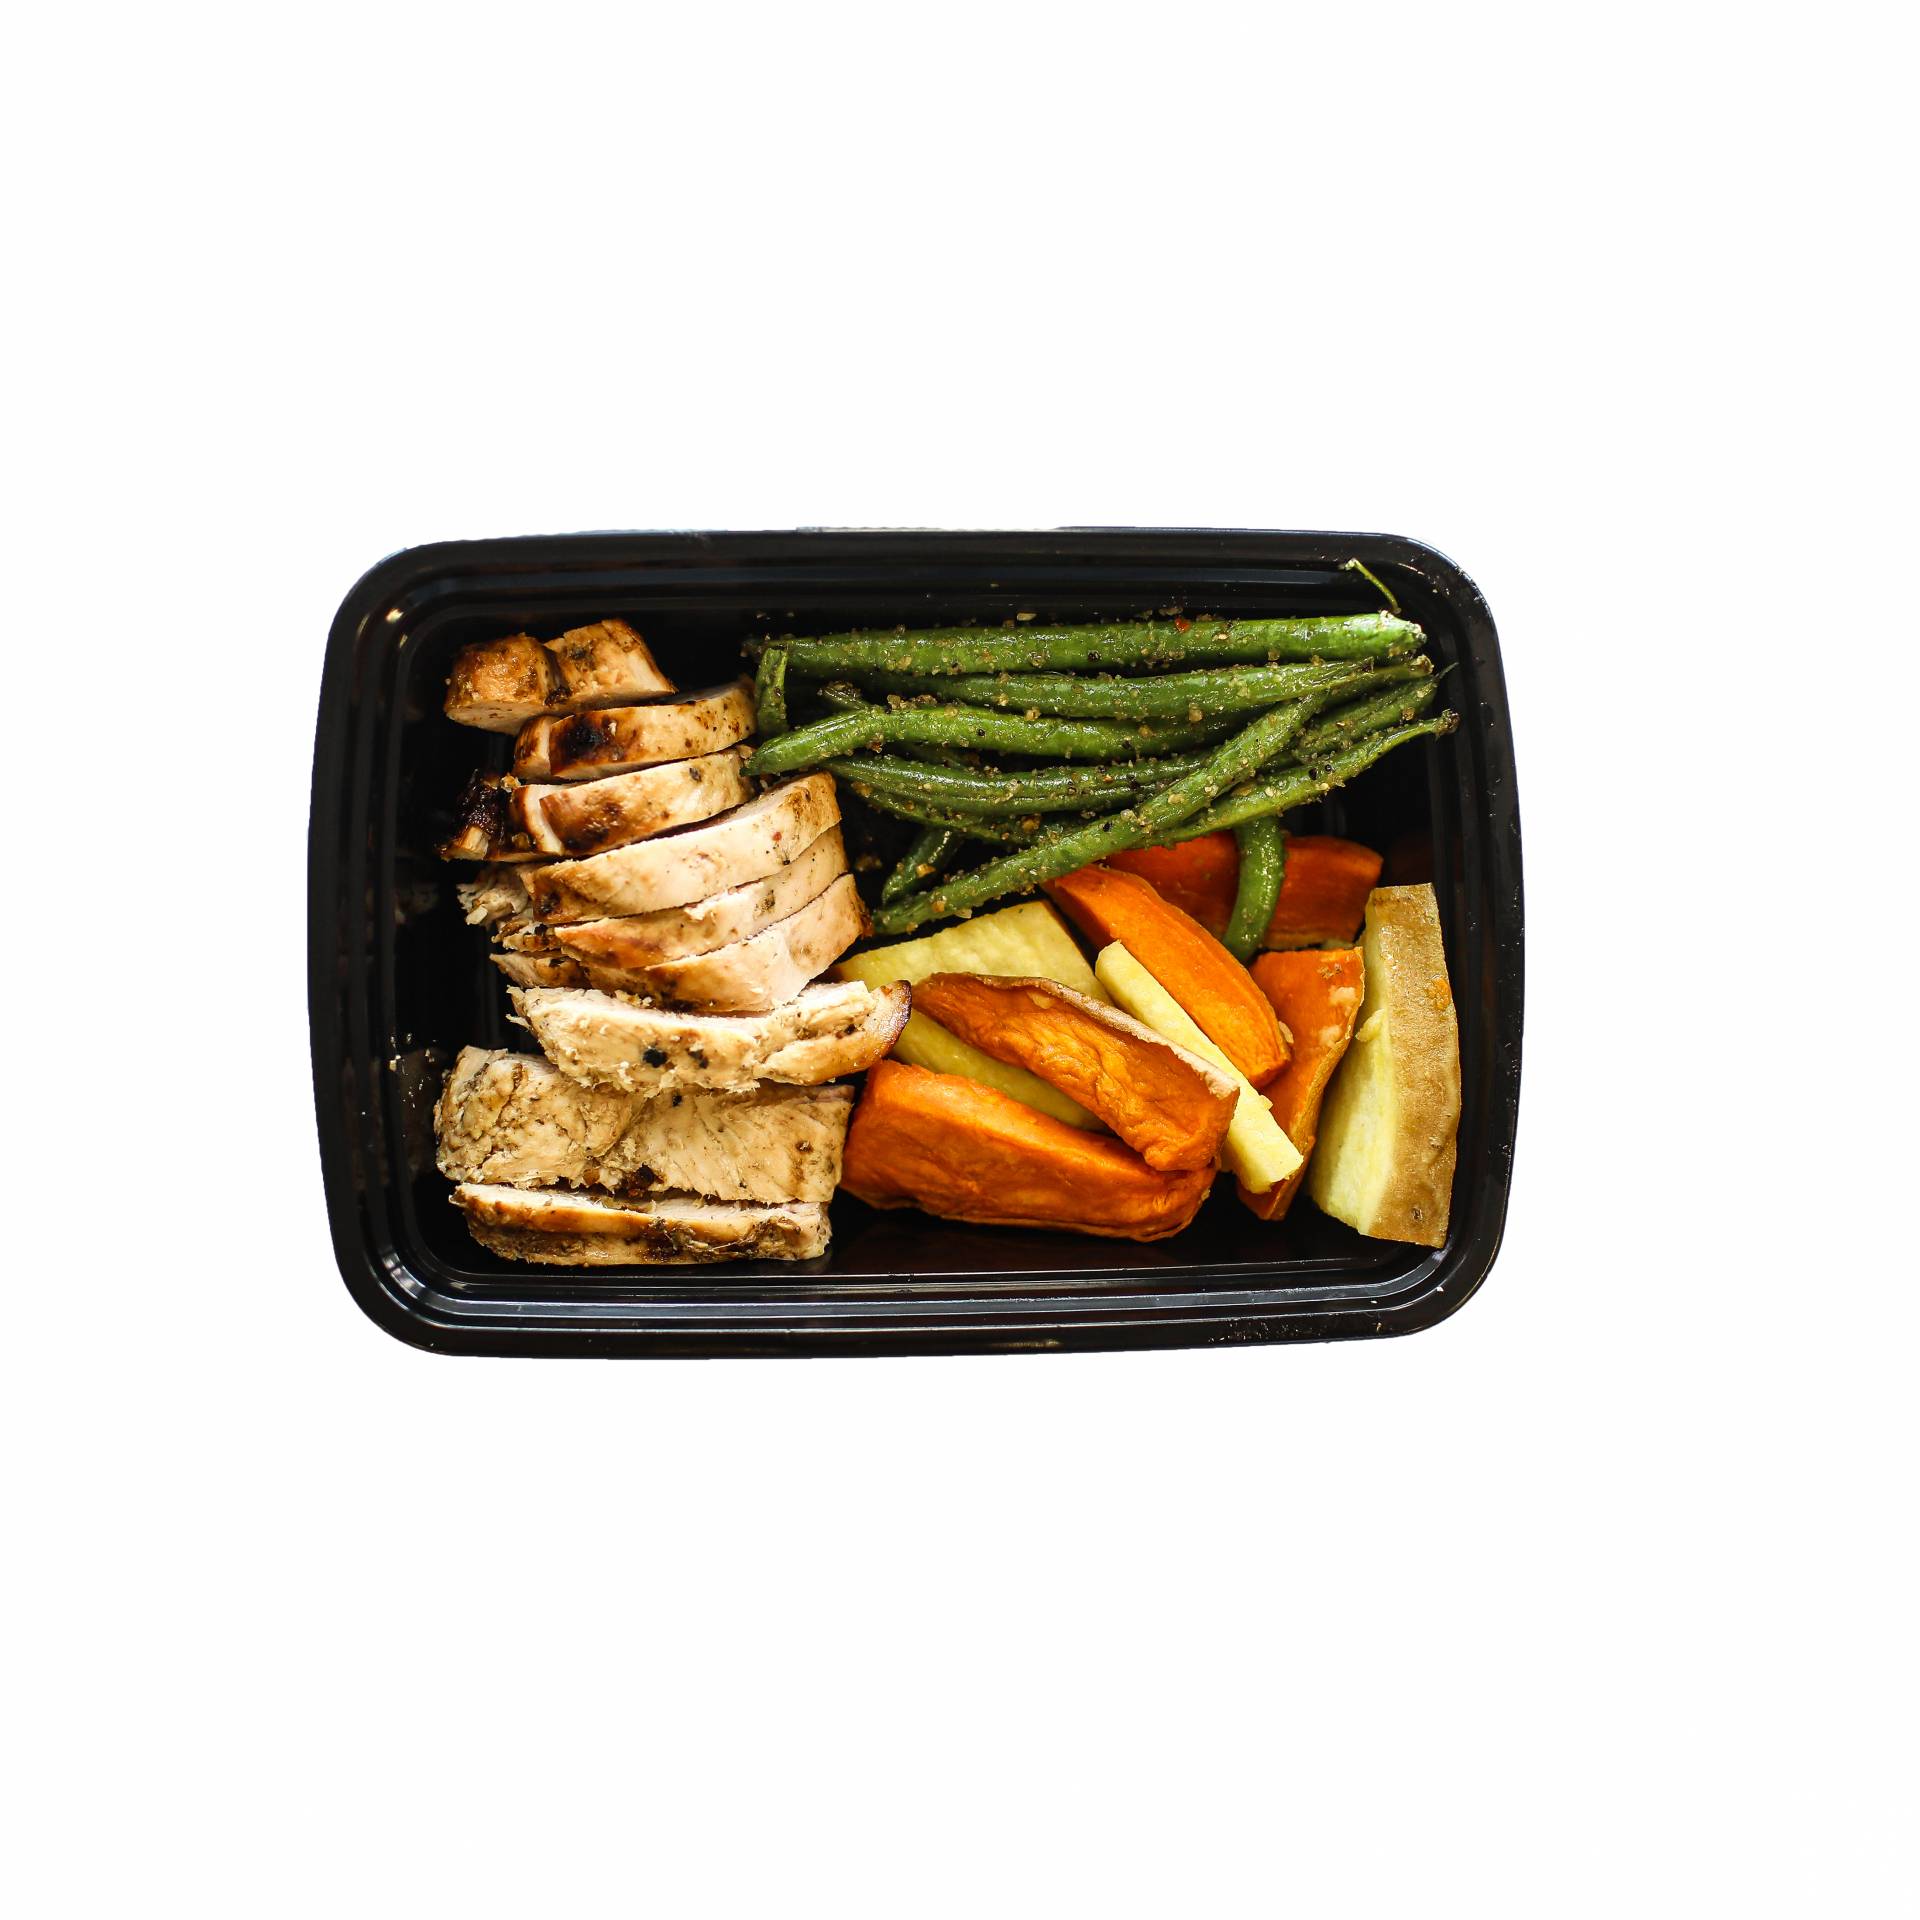 Grilled Chicken with Sweet Potatoes & Green Beans